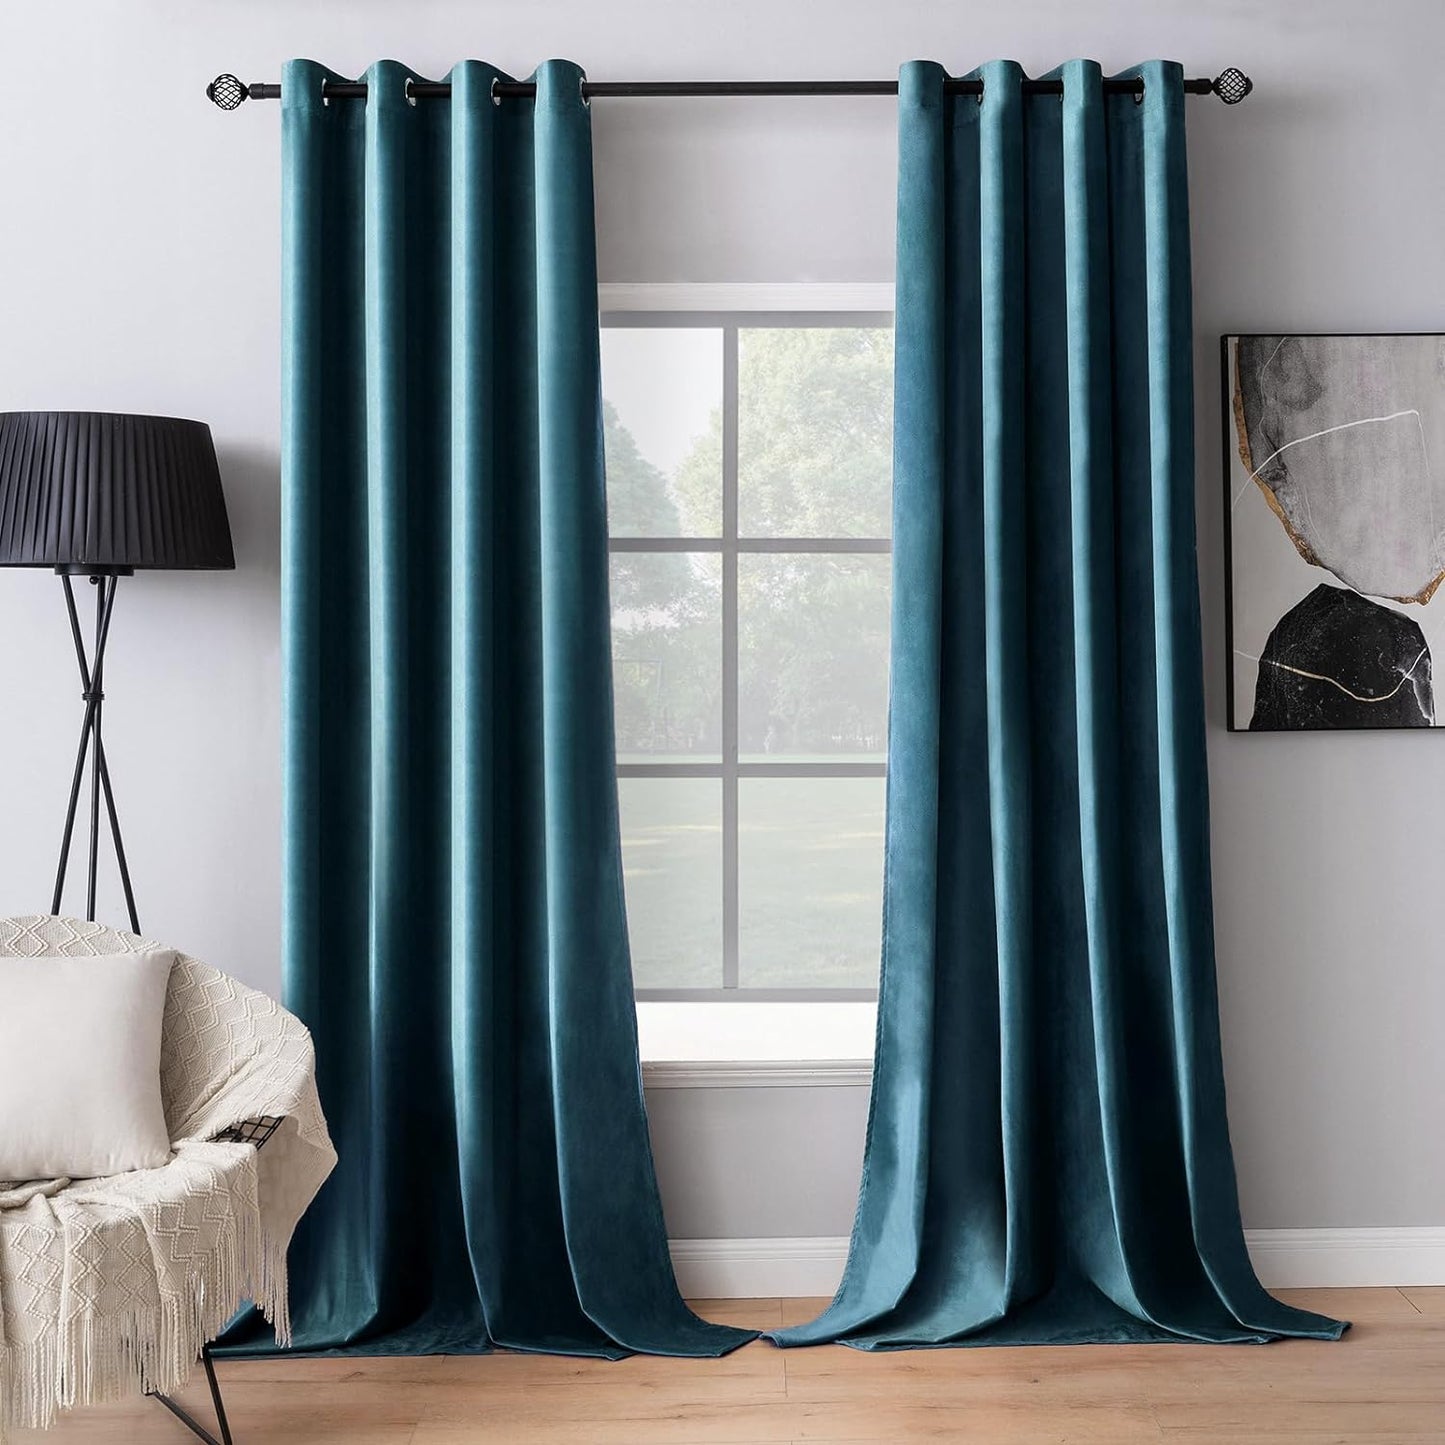 MIULEE Velvet Curtains Olive Green Elegant Grommet Curtains Thermal Insulated Soundproof Room Darkening Curtains/Drapes for Classical Living Room Bedroom Decor 52 X 84 Inch Set of 2  MIULEE Peacock Blue W52 X L90 